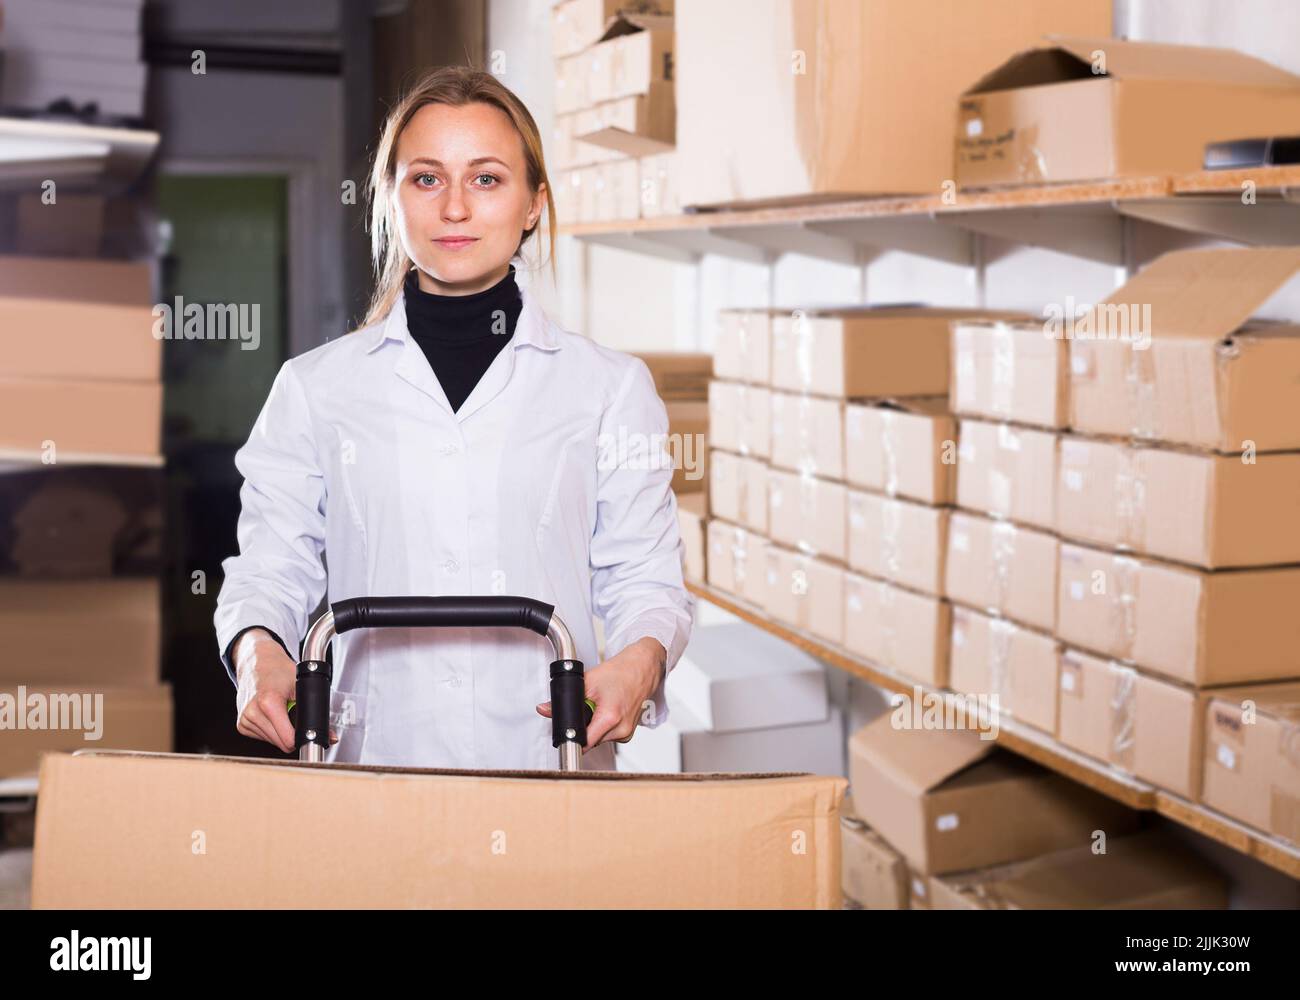 Woman worker standing with cart in production workshop Stock Photo